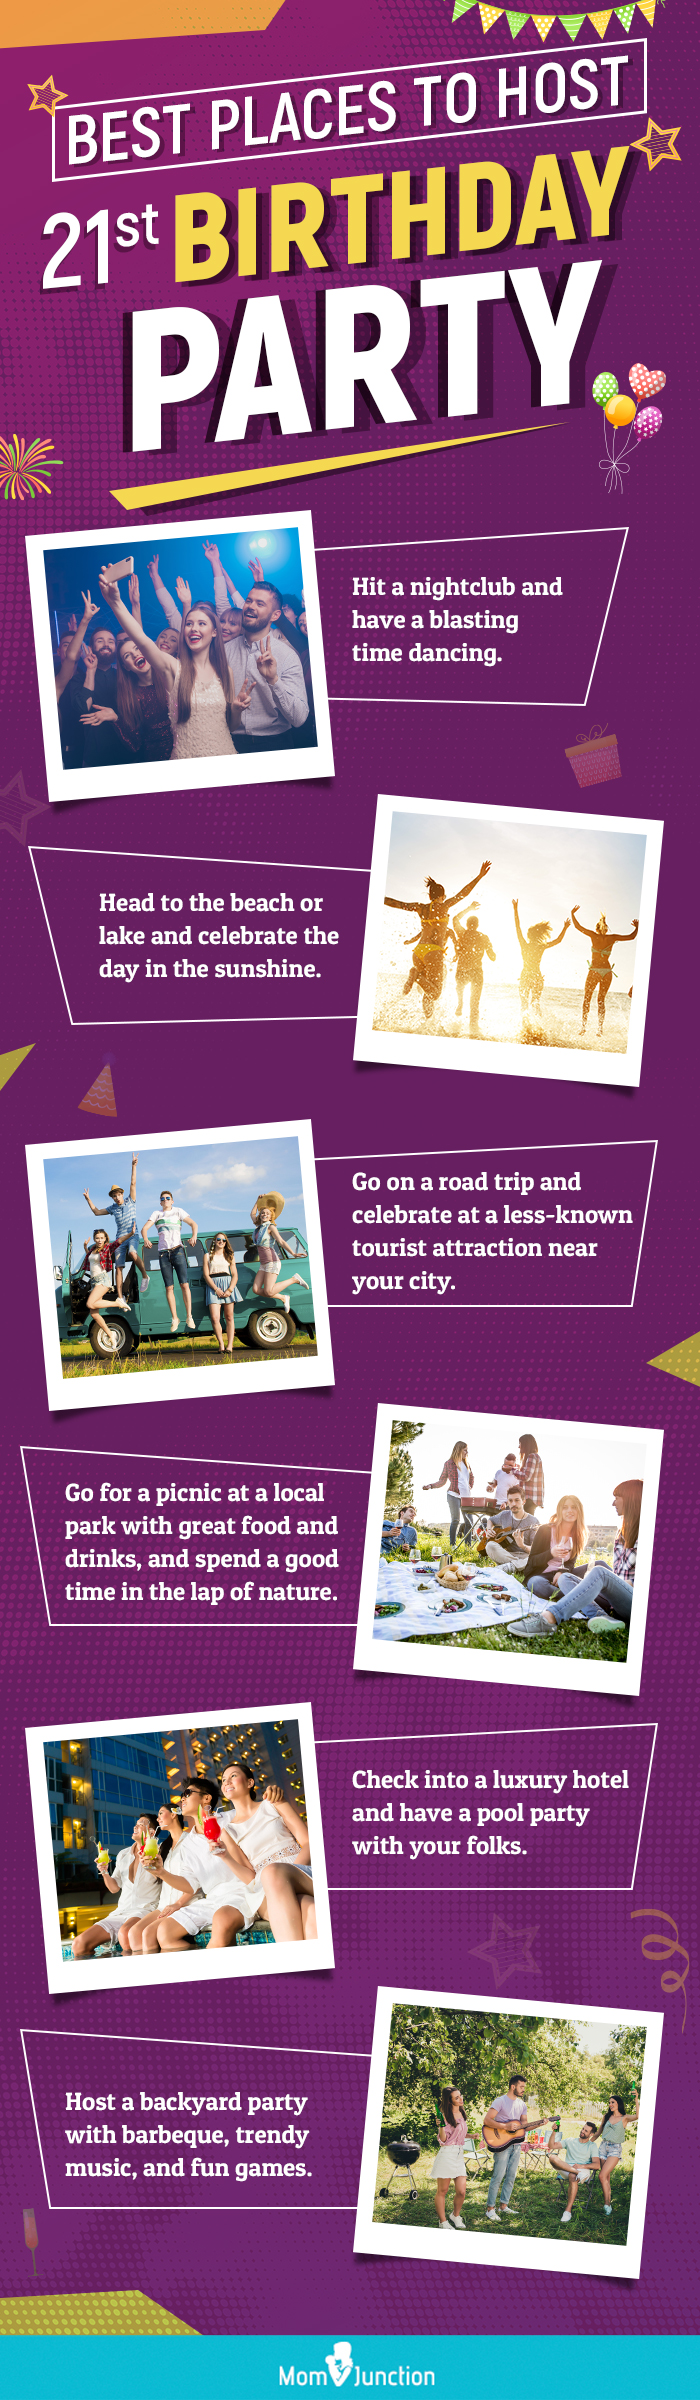 best places to host 21st birthday party (infographic)